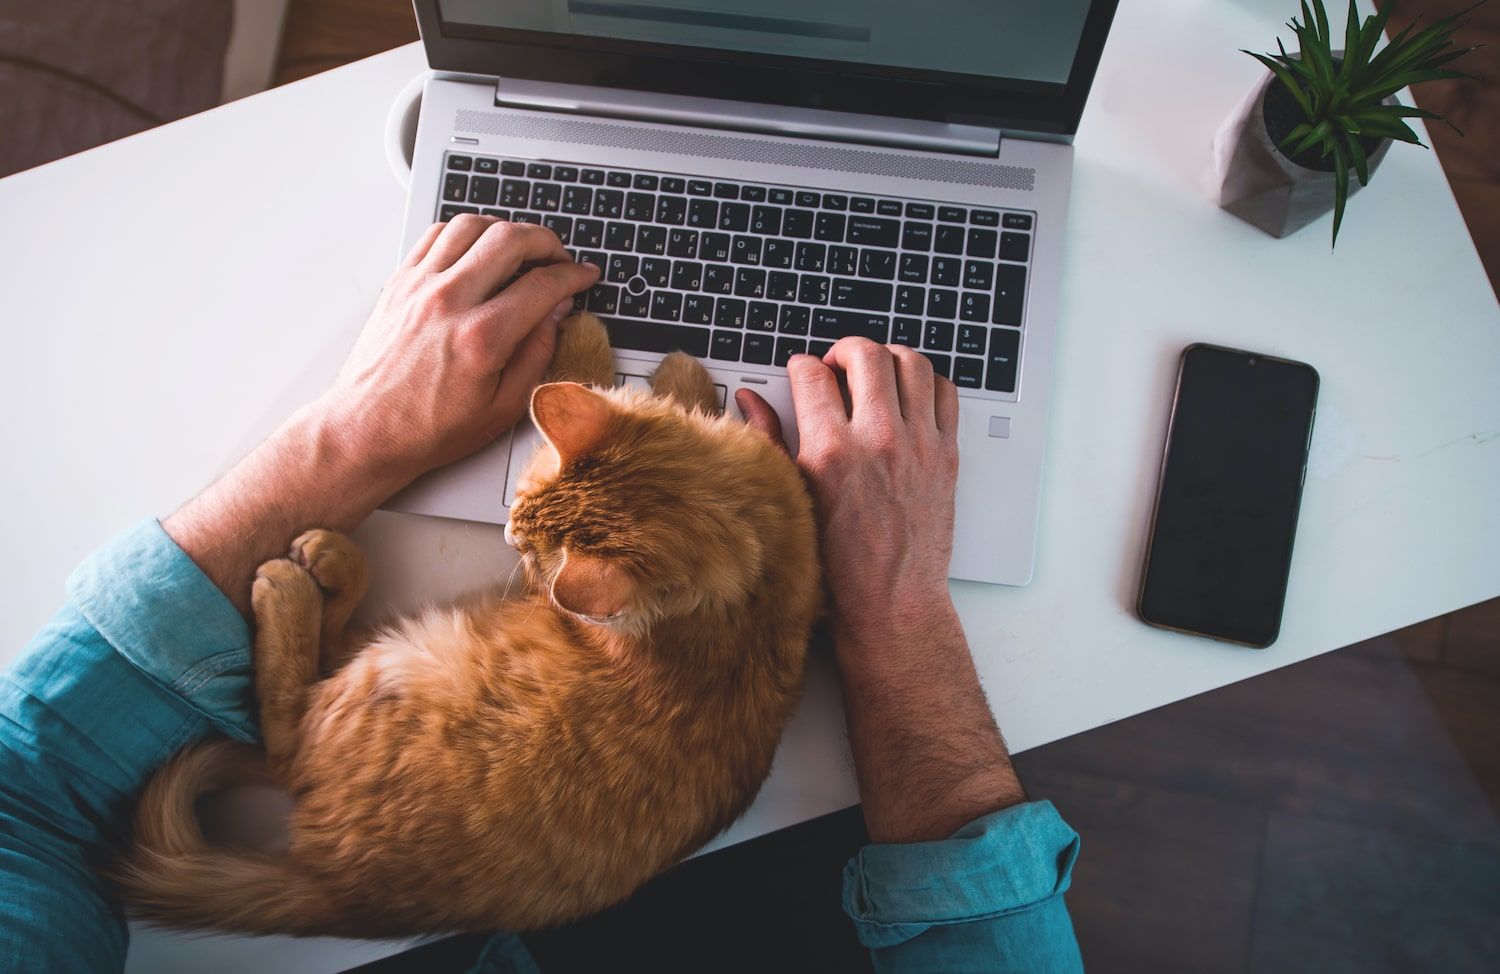 Man working on a laptop with a cat sat on the desk